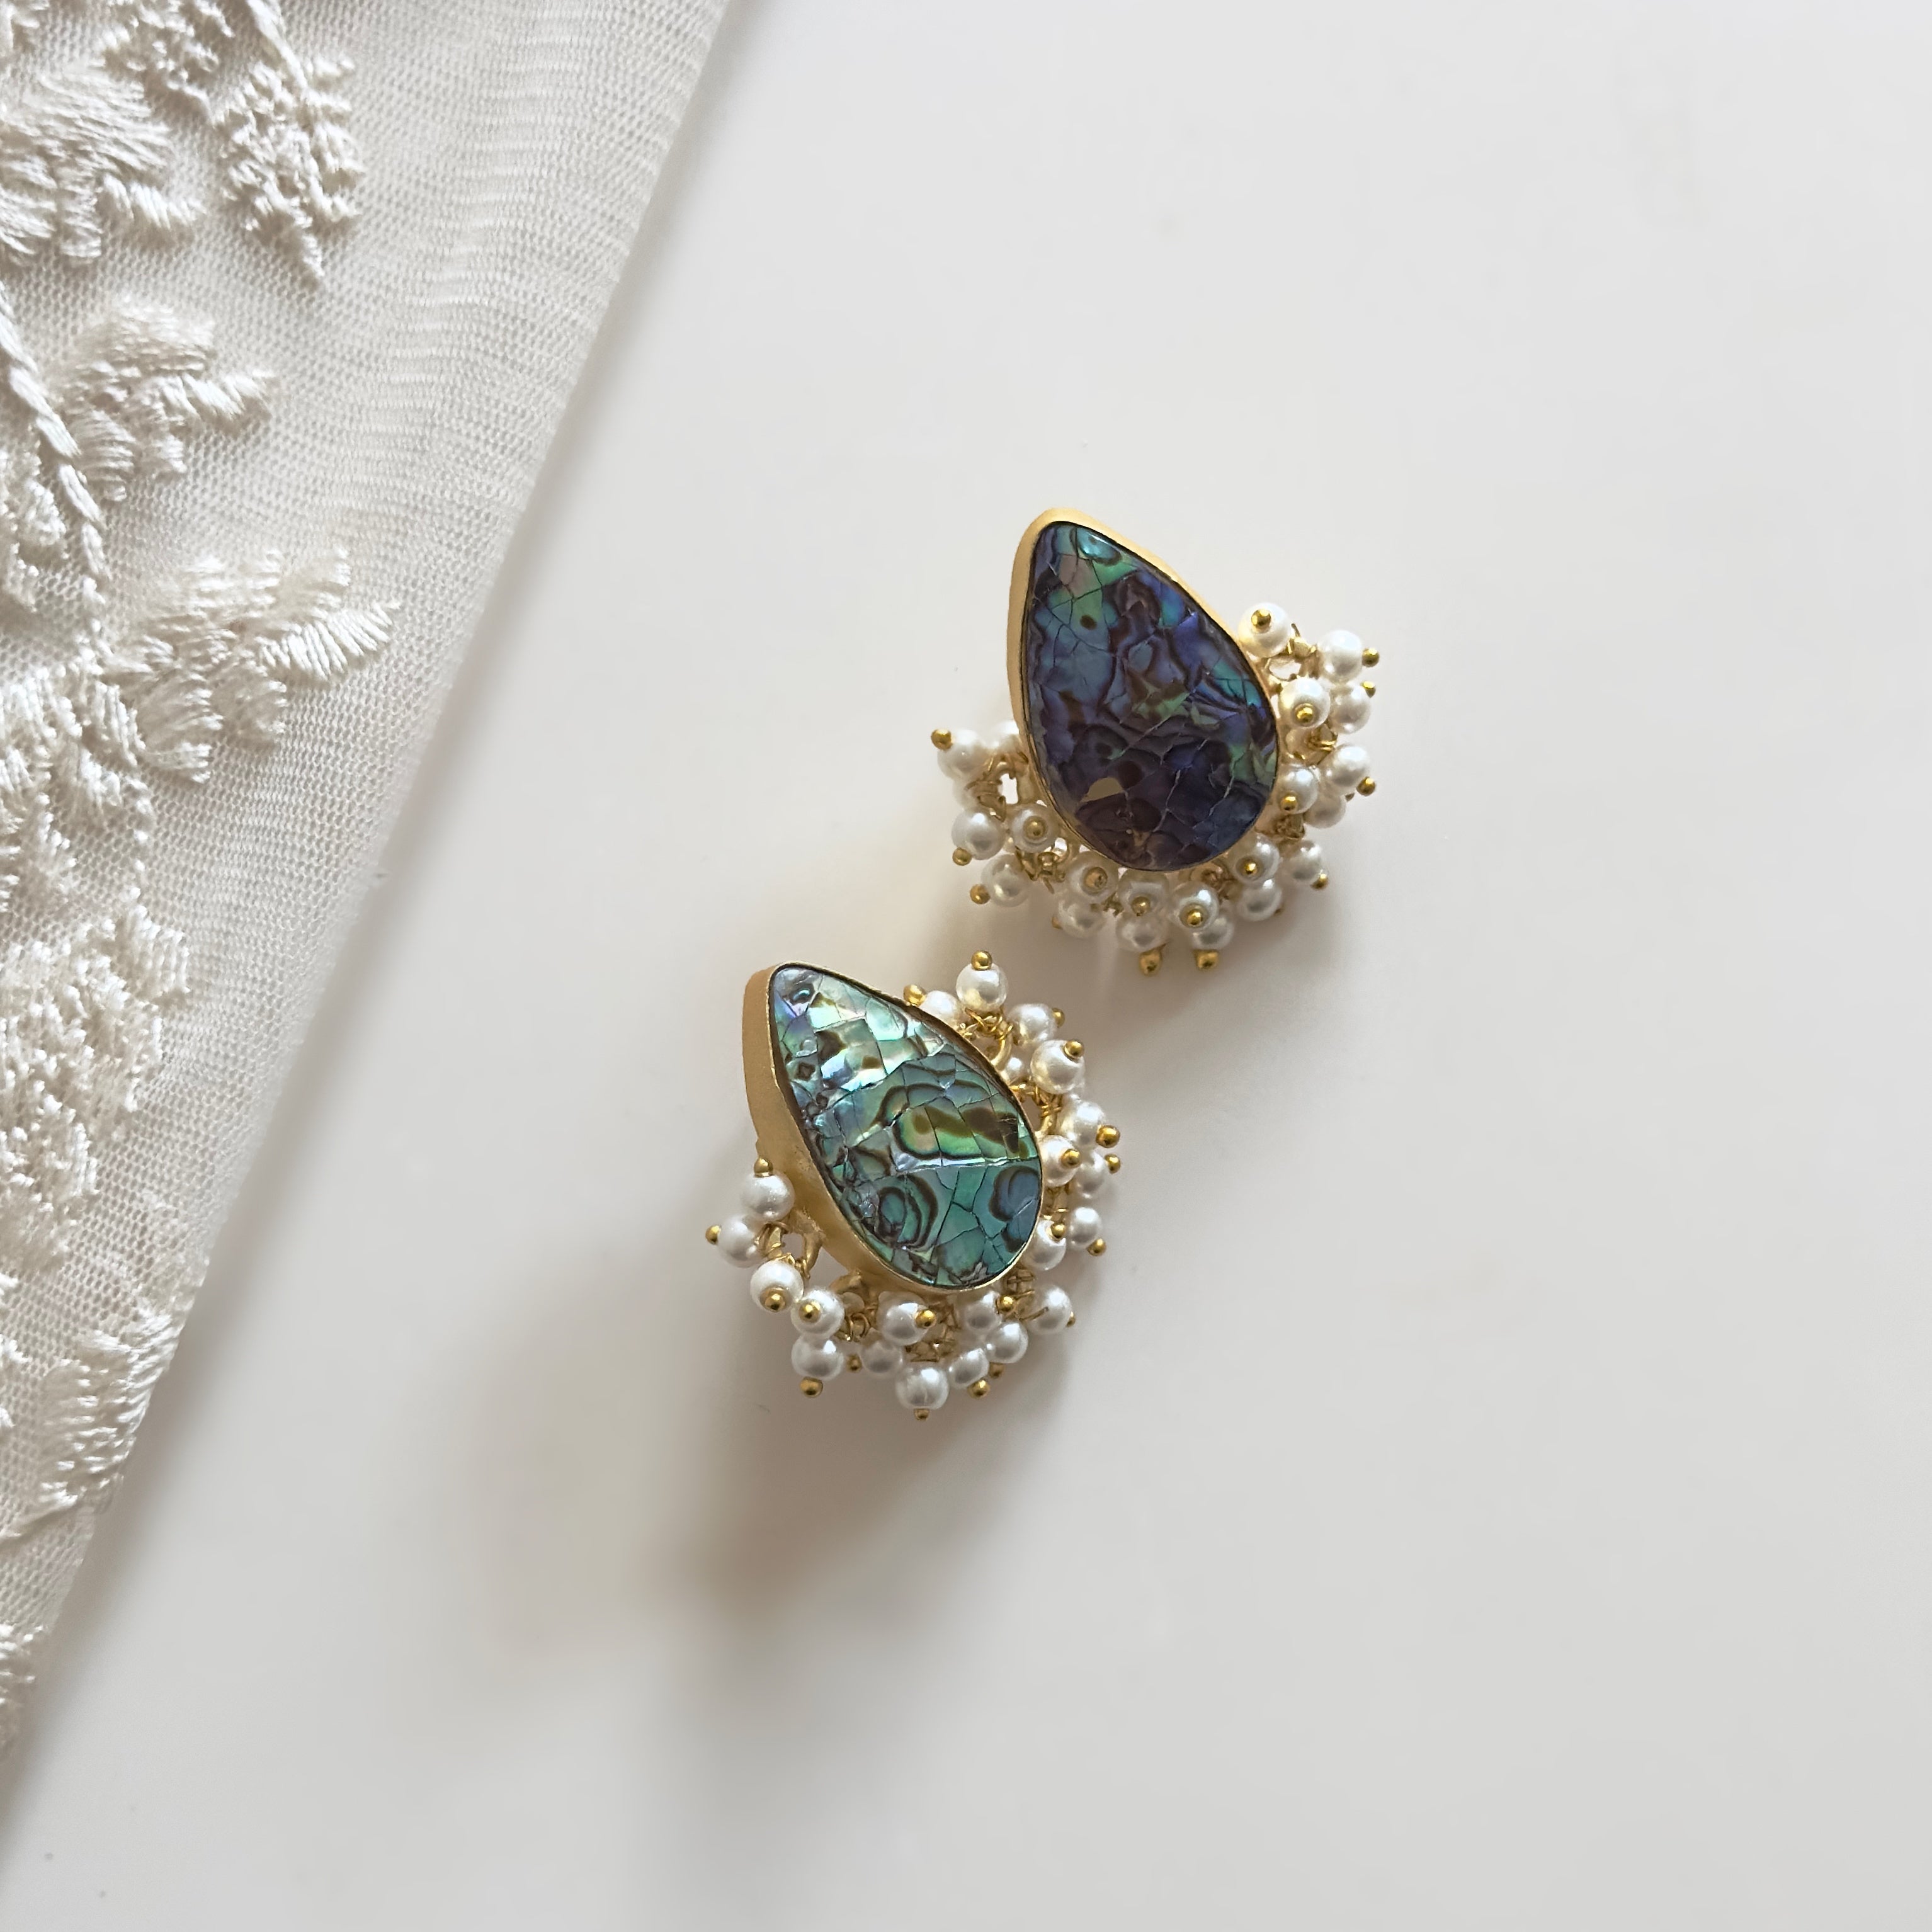 Enhance your outfit with these stunning Shell Earrings! Made from natural abalone shell, these perfect studs will add a touch of elegance and nature to your look. Handcrafted to perfection, they are a must-have accessory for any fashion-forward individual. Upgrade your style with these beautiful Shell Earrings today!